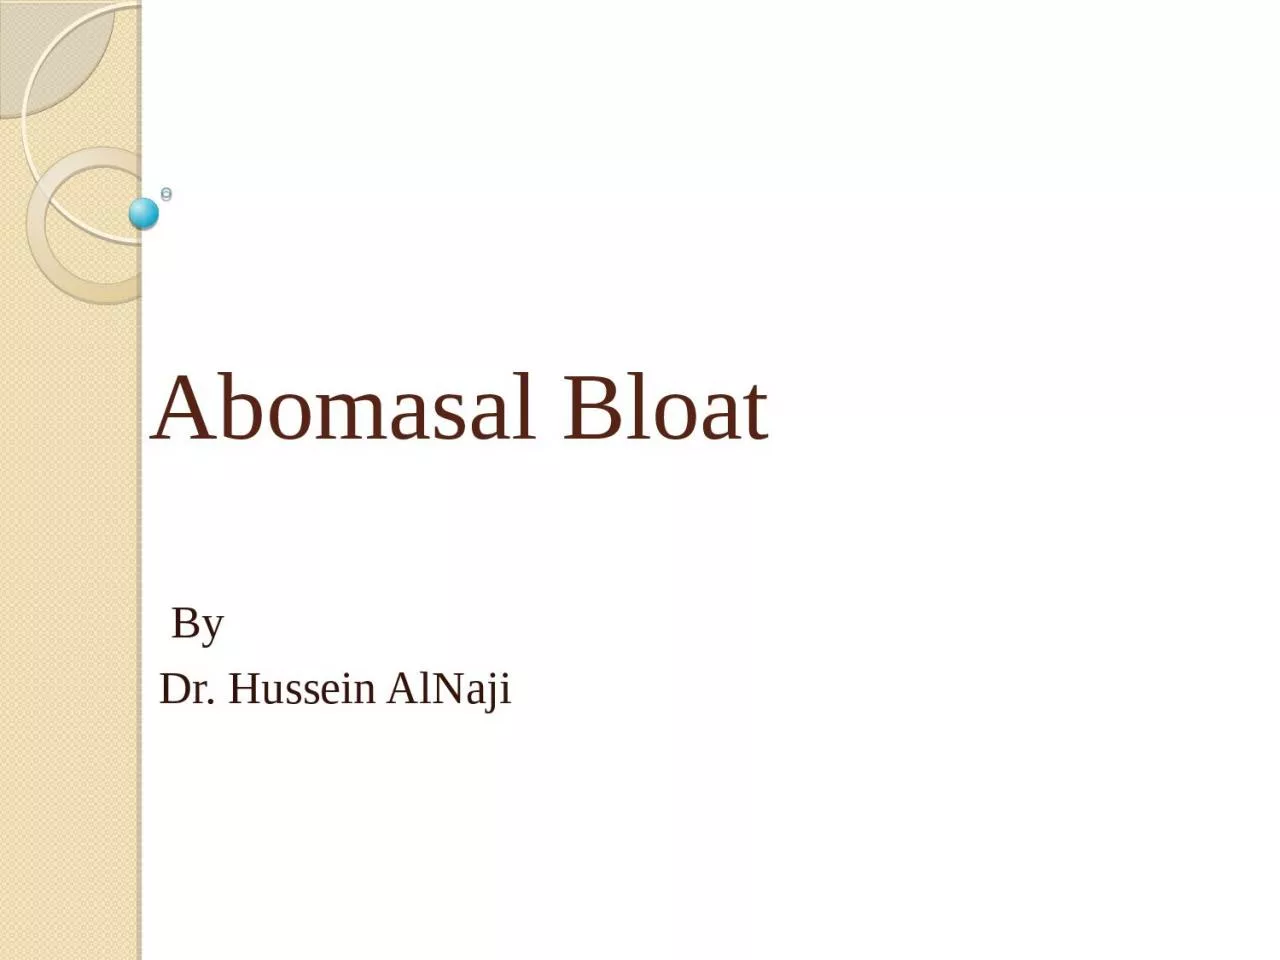 Abomasal  Bloat By  Dr. Hussein